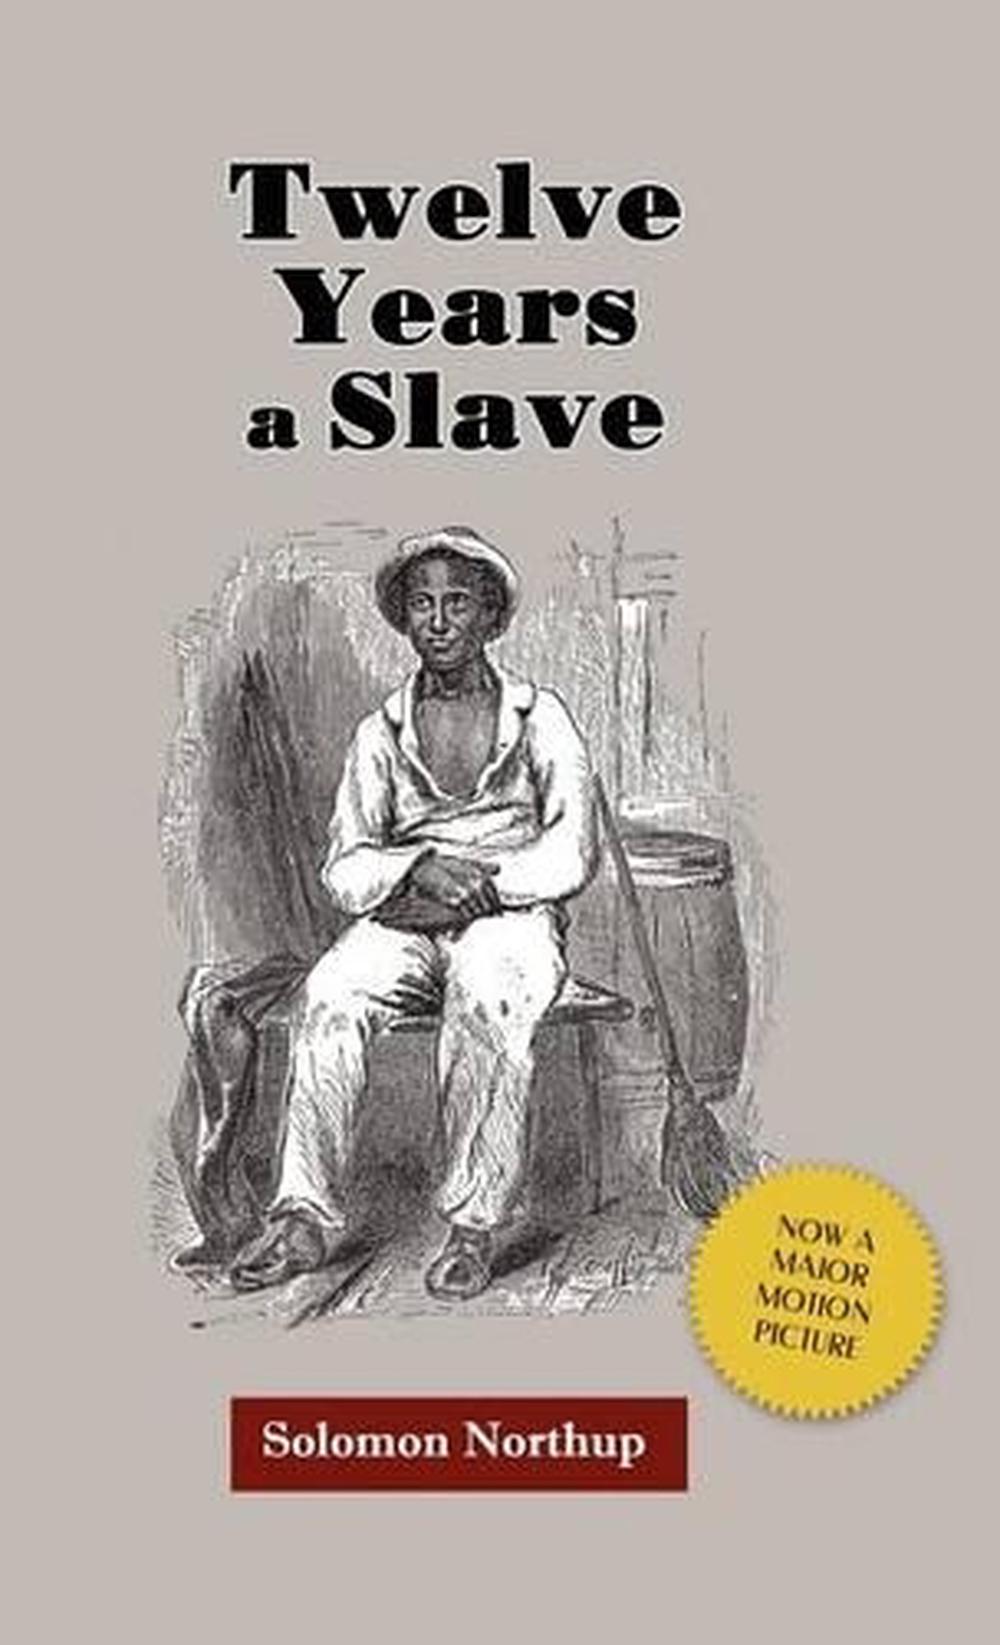 book review 12 years a slave